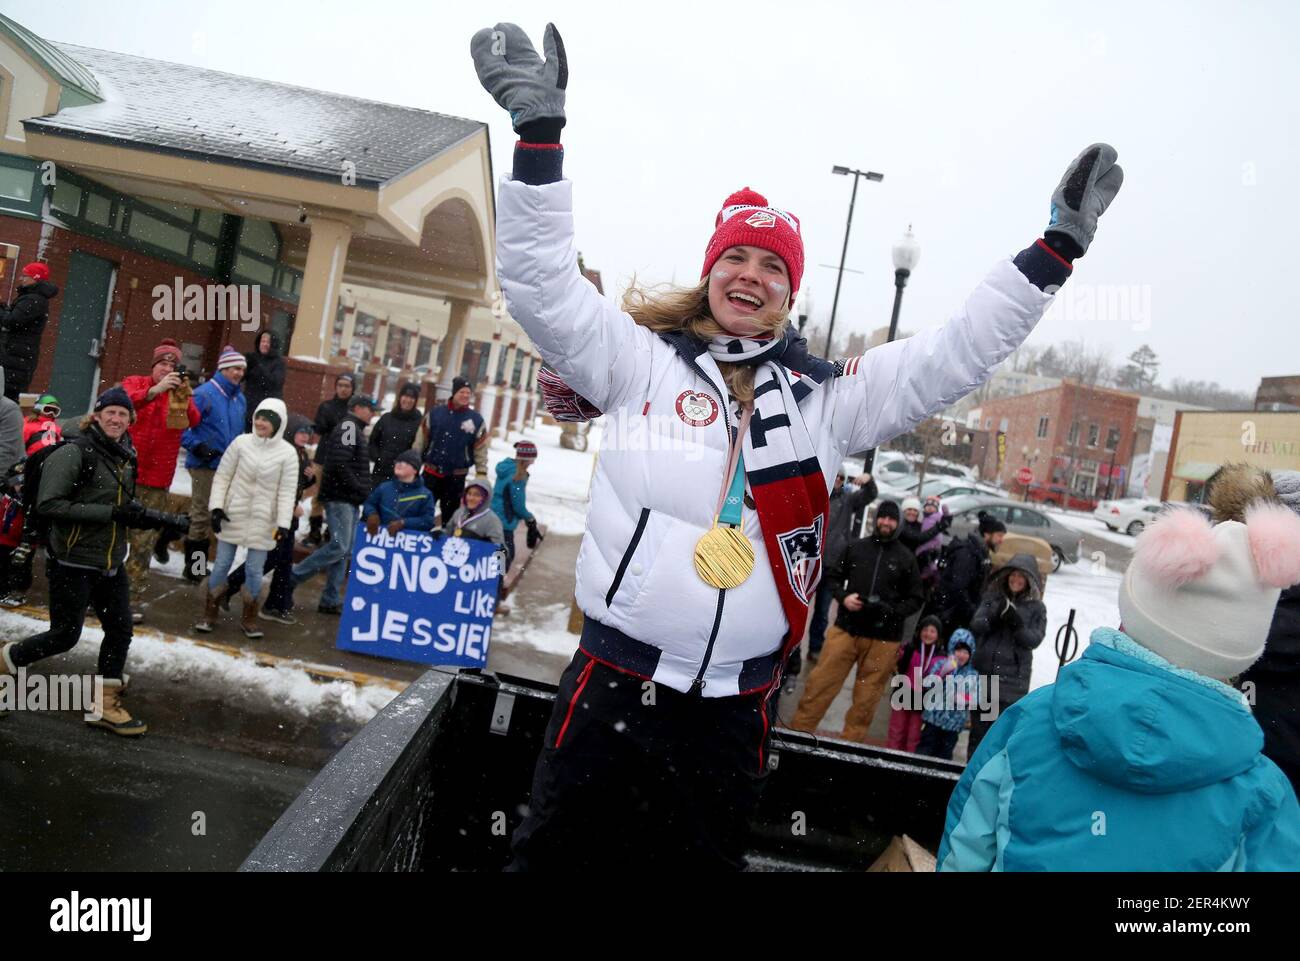 Jessie Diggins, Team USA Olympic gold medalist cross country skier, salutes fans as hundreds brave snowy, blustery weather to honor her with a parade on Saturday, April 14, 2018, in Stillwater, Minn. (Photo by David Joles/Minneapolis Star Tribune/TNS/Sipa USA) Stock Photo